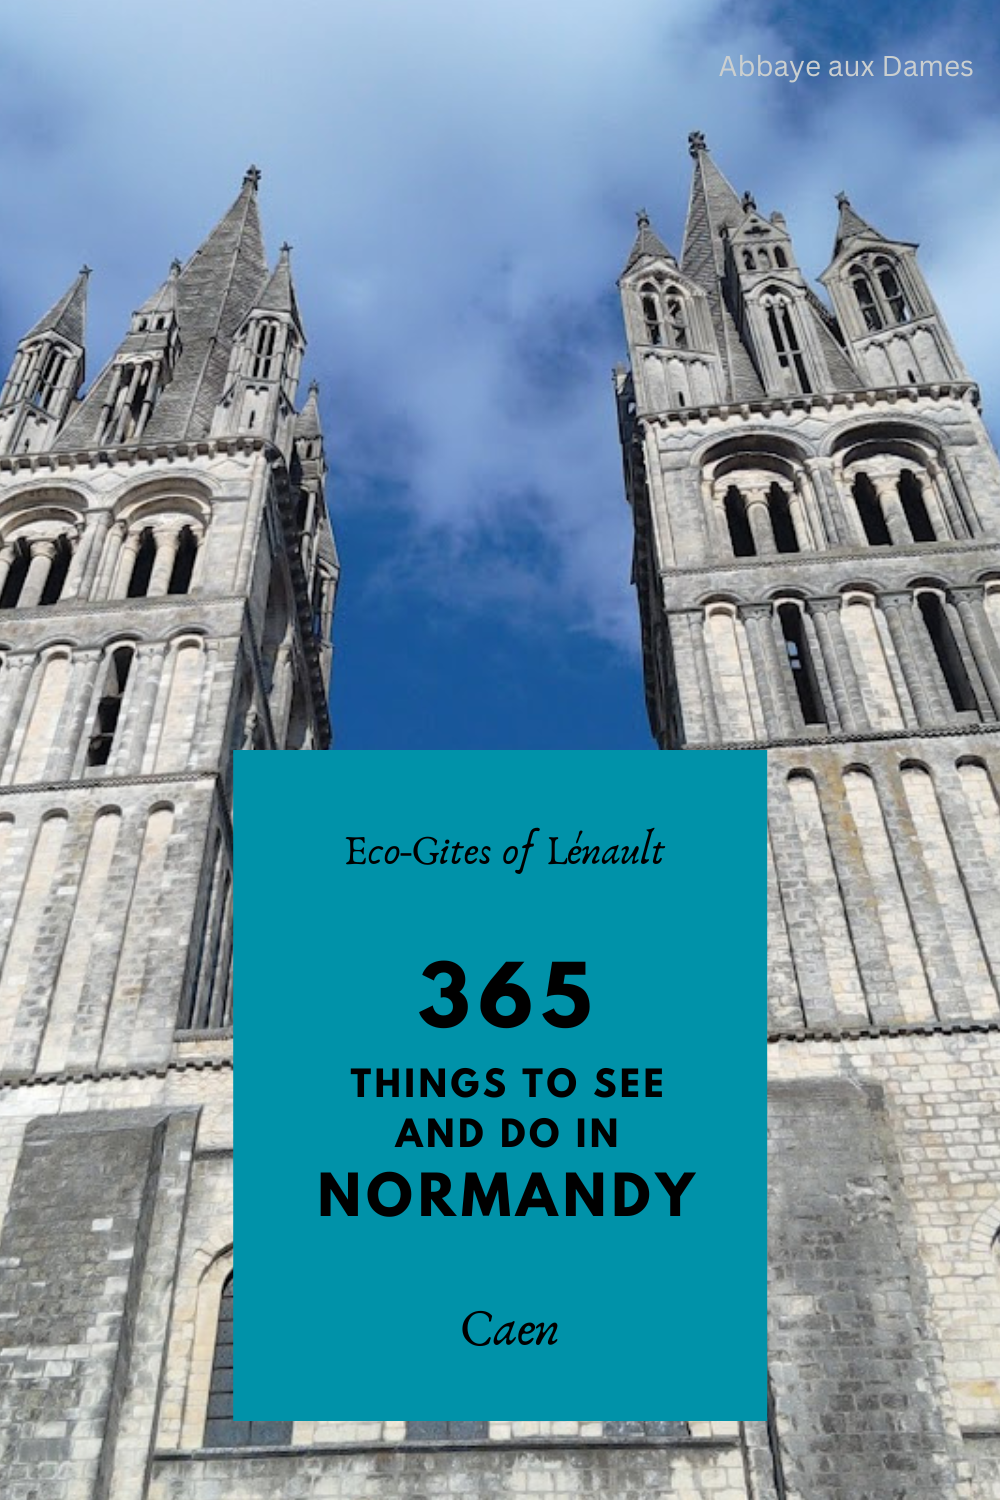 7 Reasons to visit Caen, Normandy, France